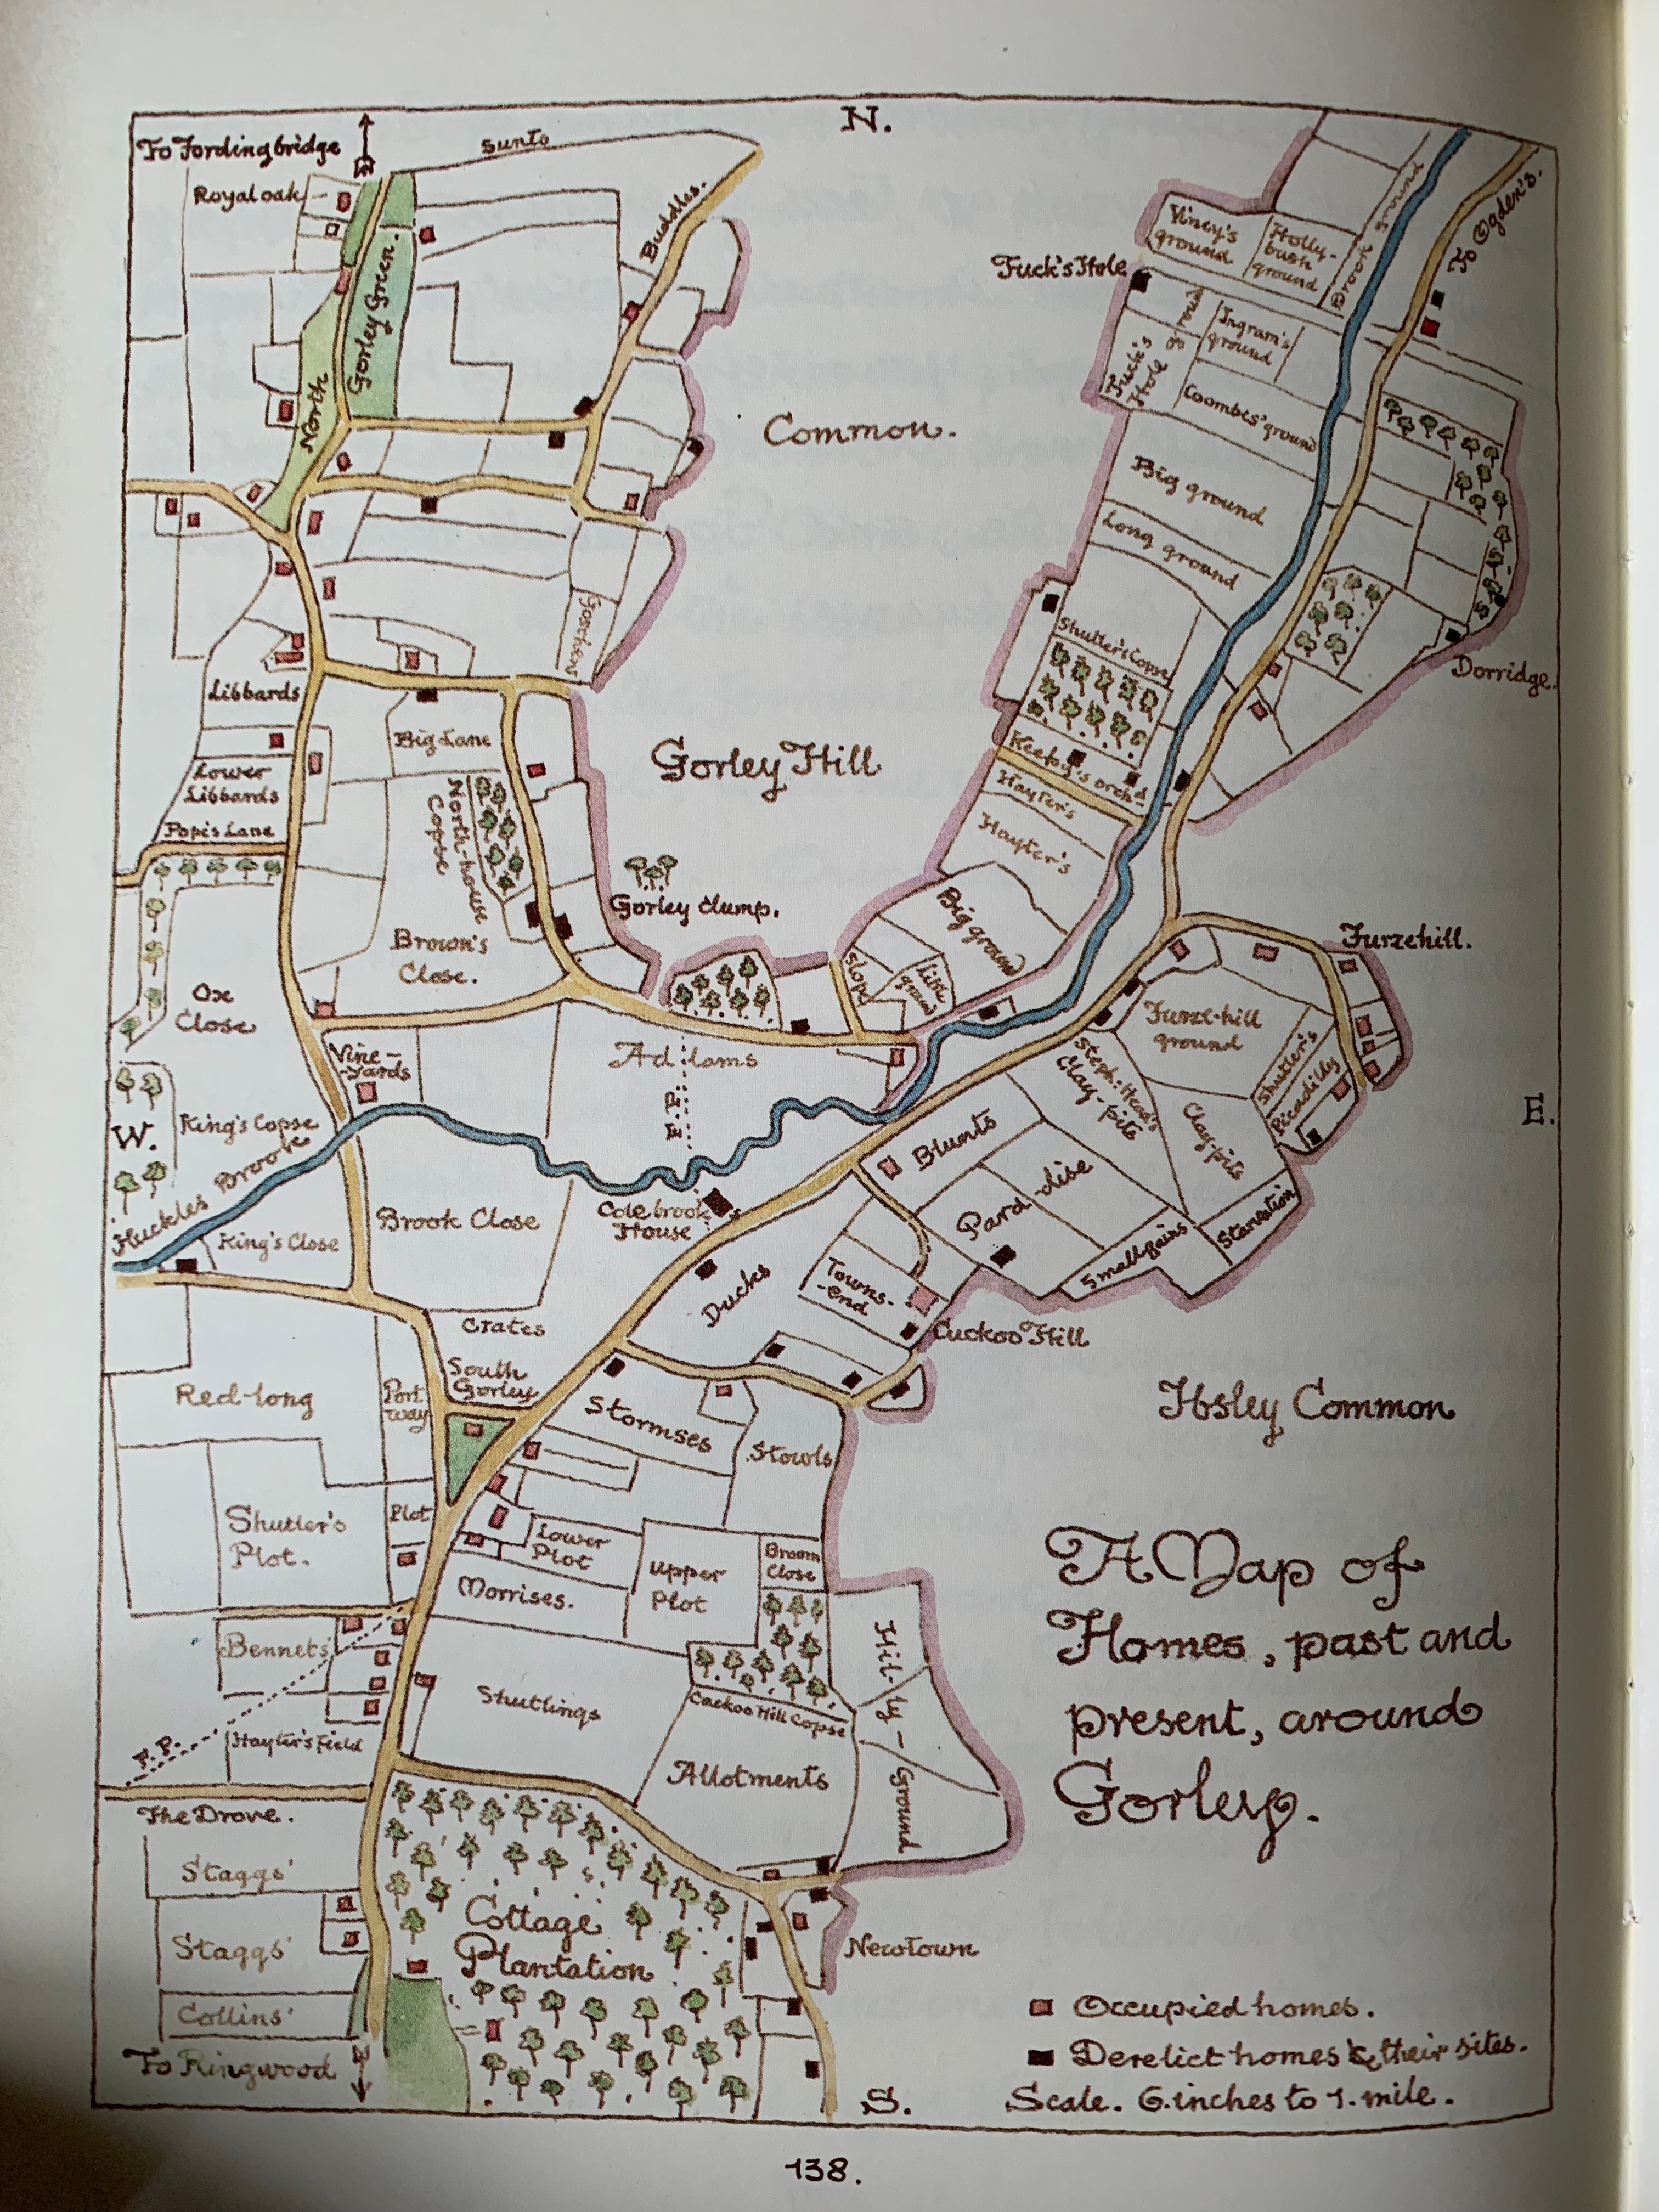 Heywood's map of Gorley, early 1900s